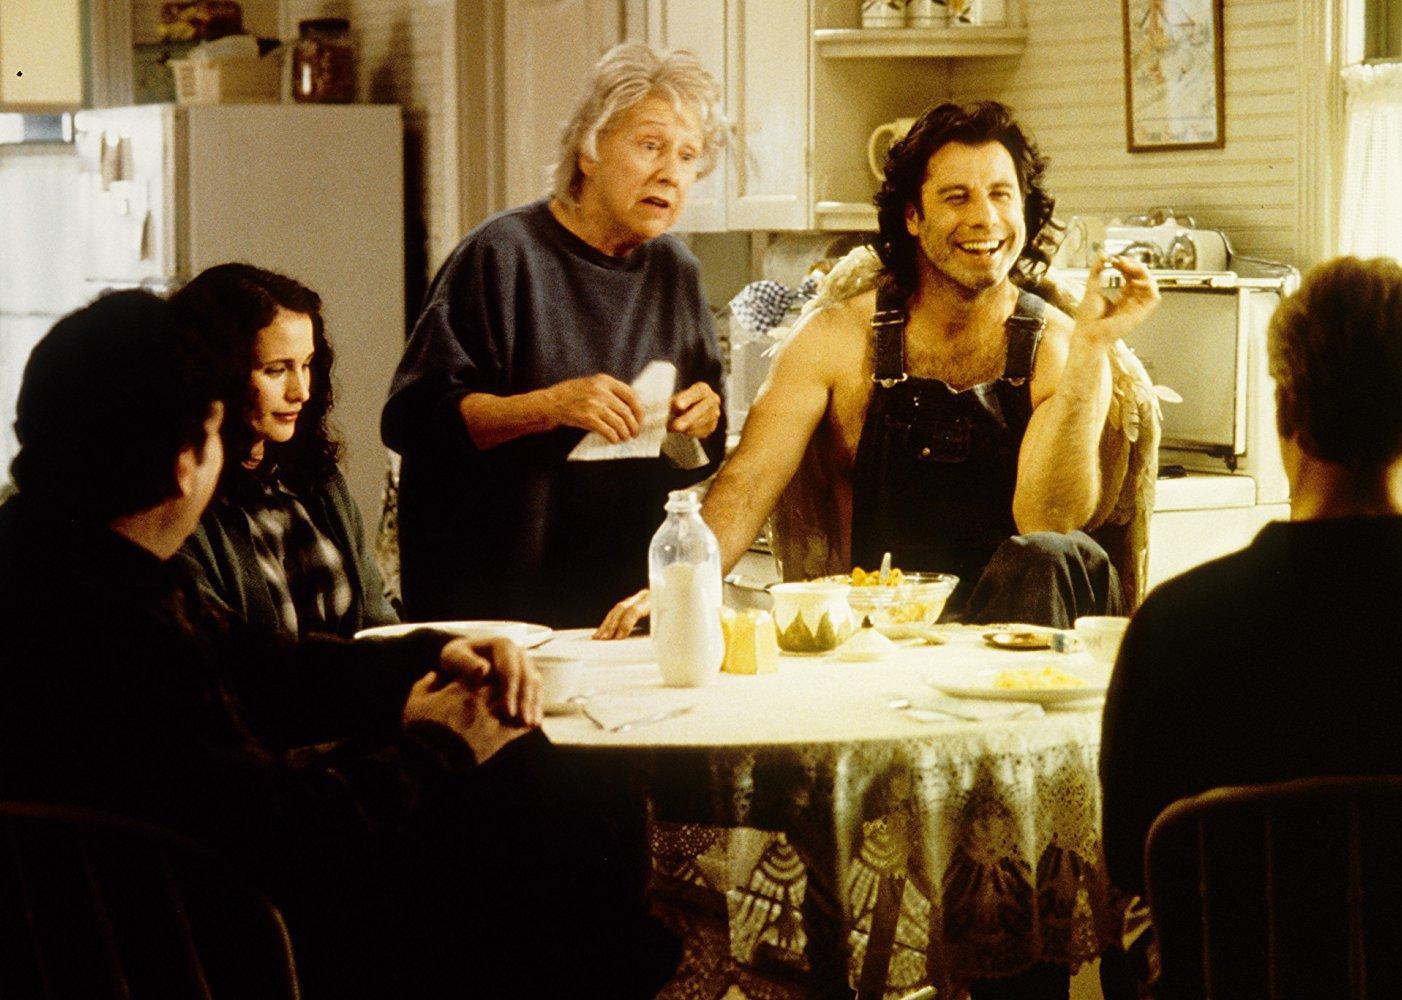 John Travolta, wearing overalls with no shirt, and Andie MacDowell sitting at a table with several other people.